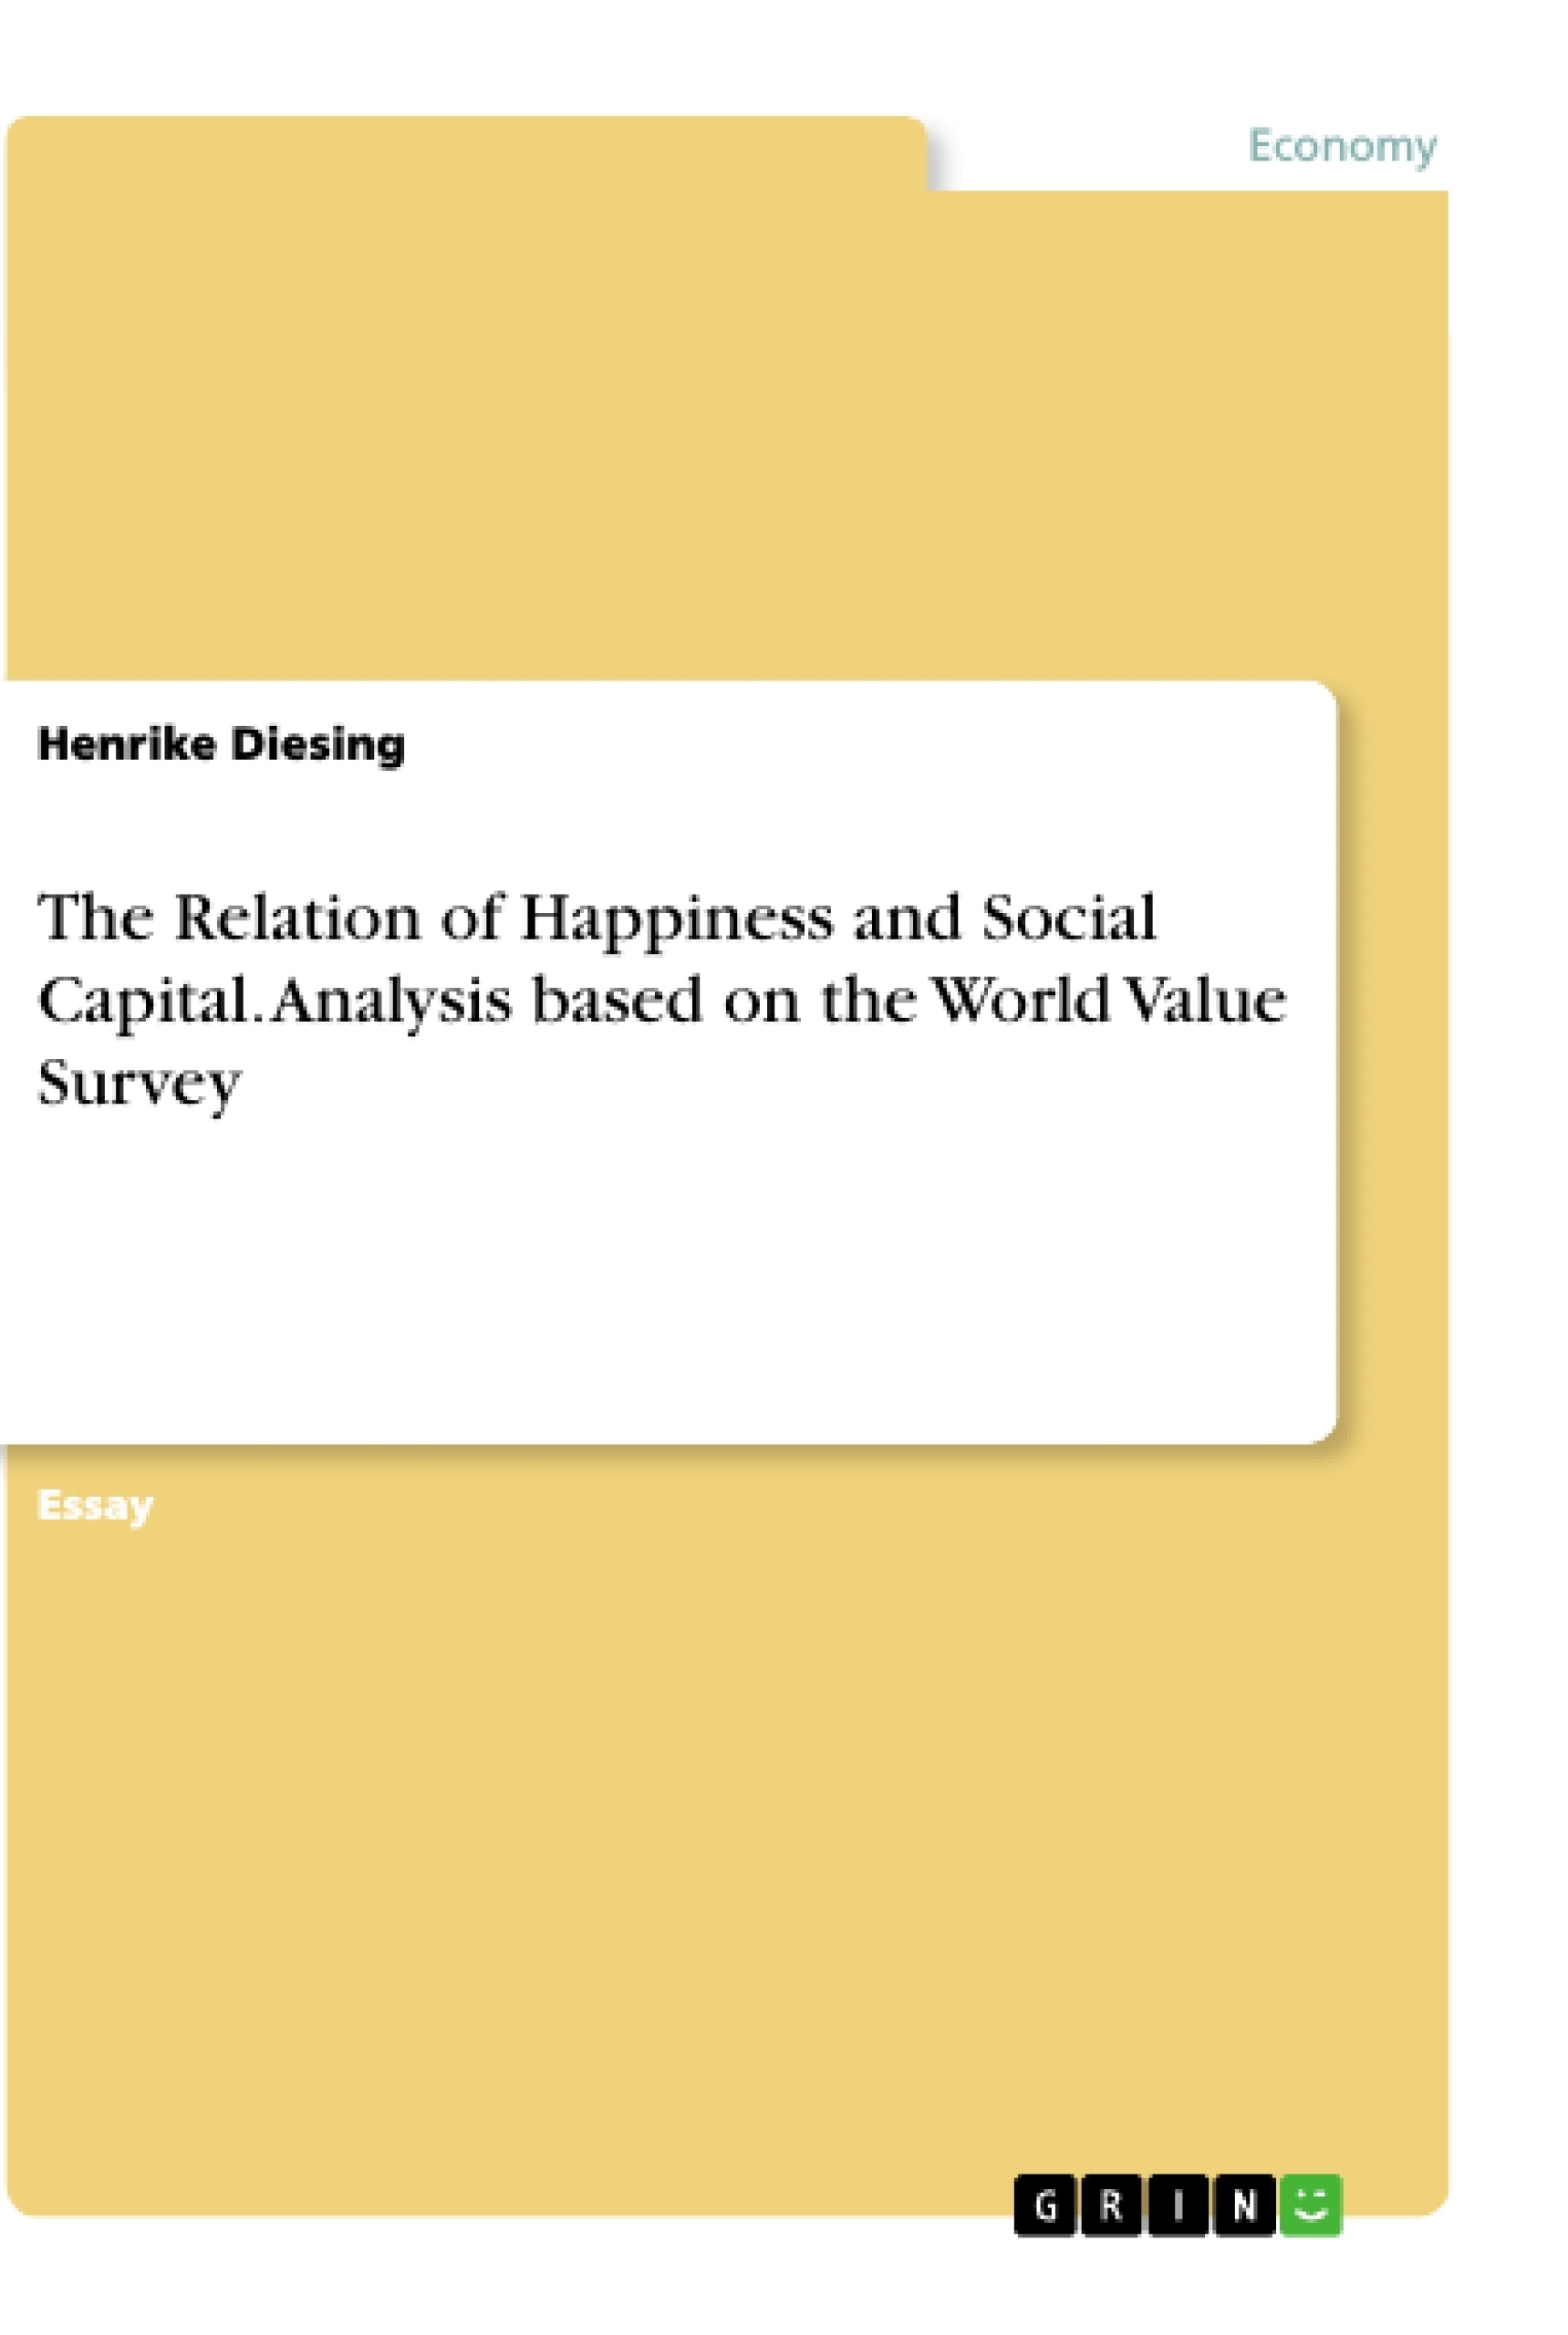 Título: The Relation of Happiness and Social Capital. Analysis based on the World Value Survey